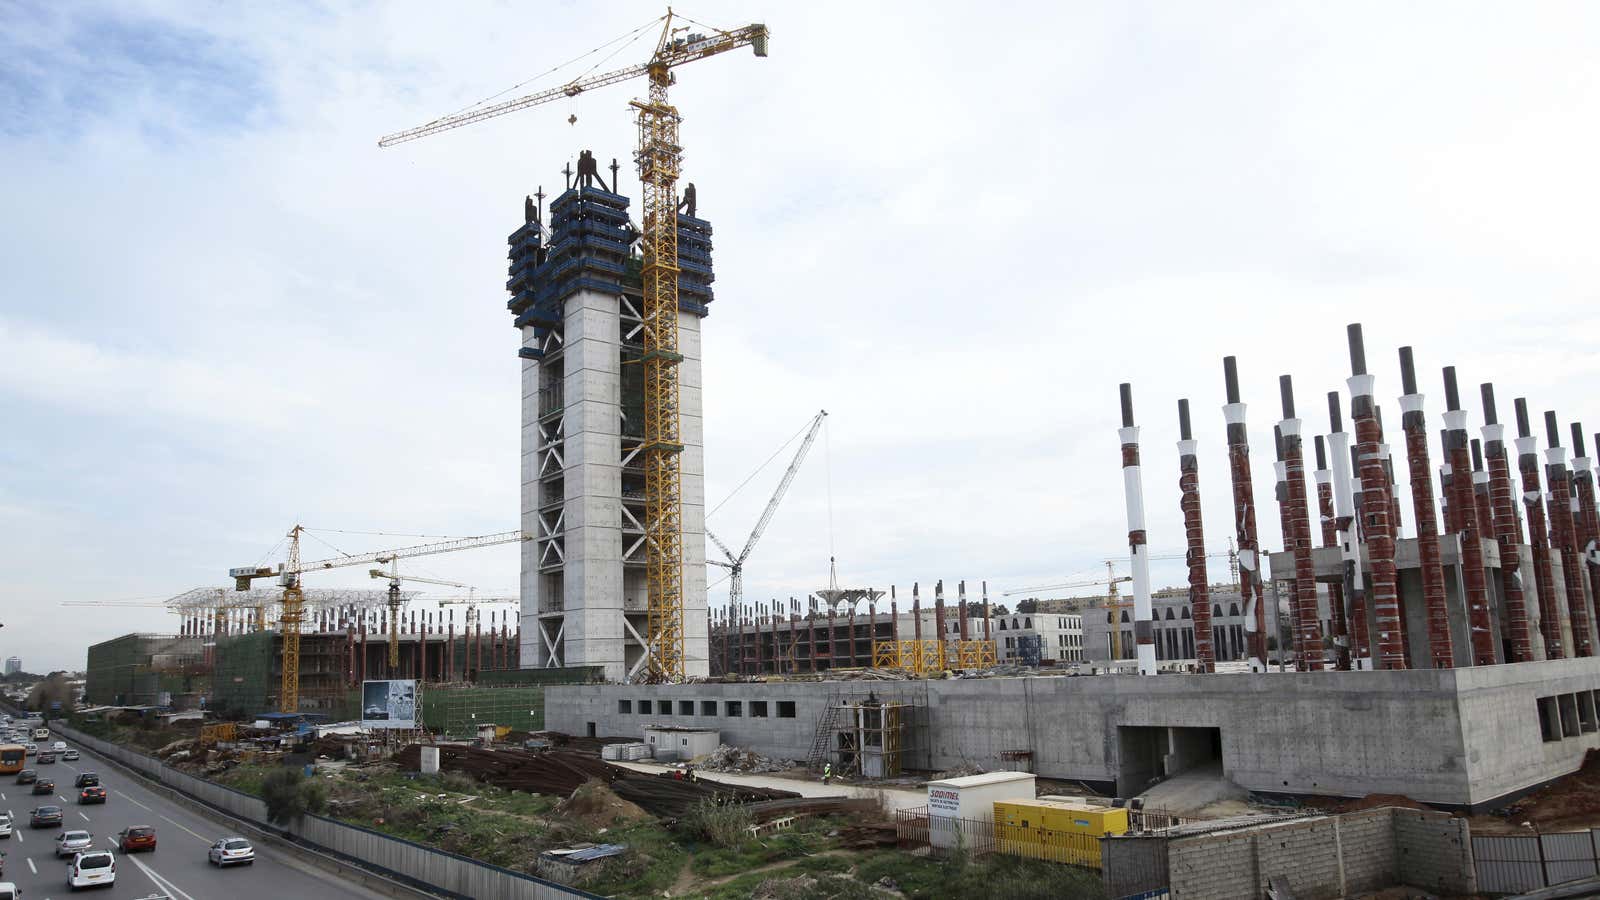 Algiers’ Great Mosque, is being built by the China State Construction Engineering Corporation (CSCEC).